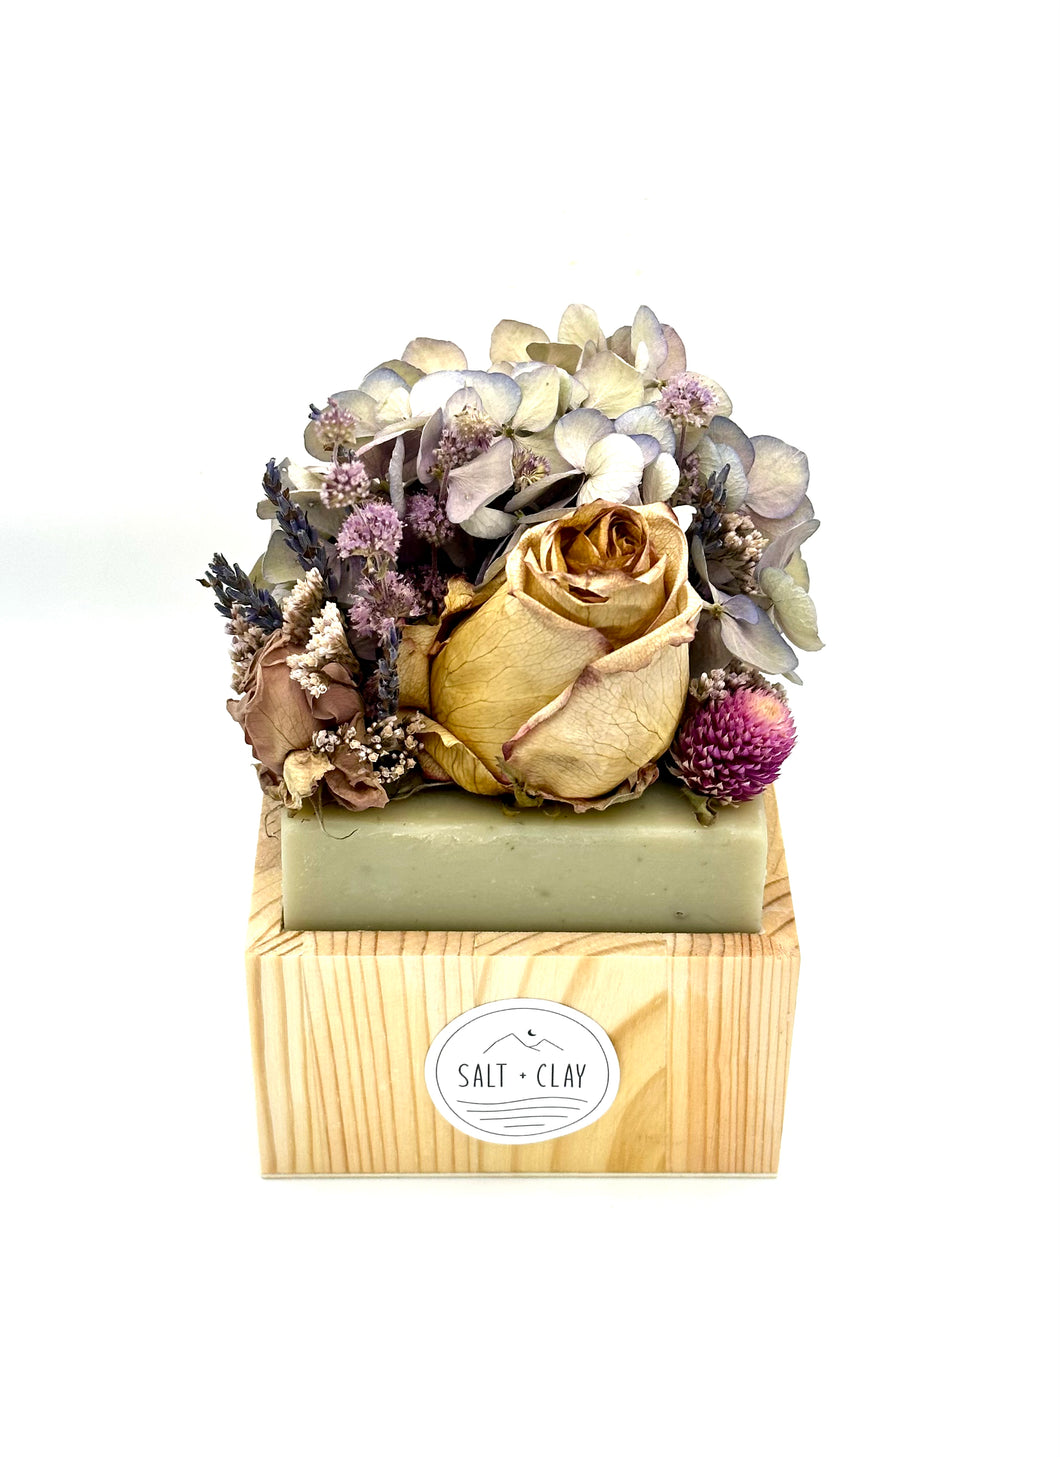 French Lavender Flower Soap ~ With Homegrown Dried Bouquet ~ Olive Oil + Lavender Essential Oil ~ For Face, Hands & Body ~ 16oz Soap Block